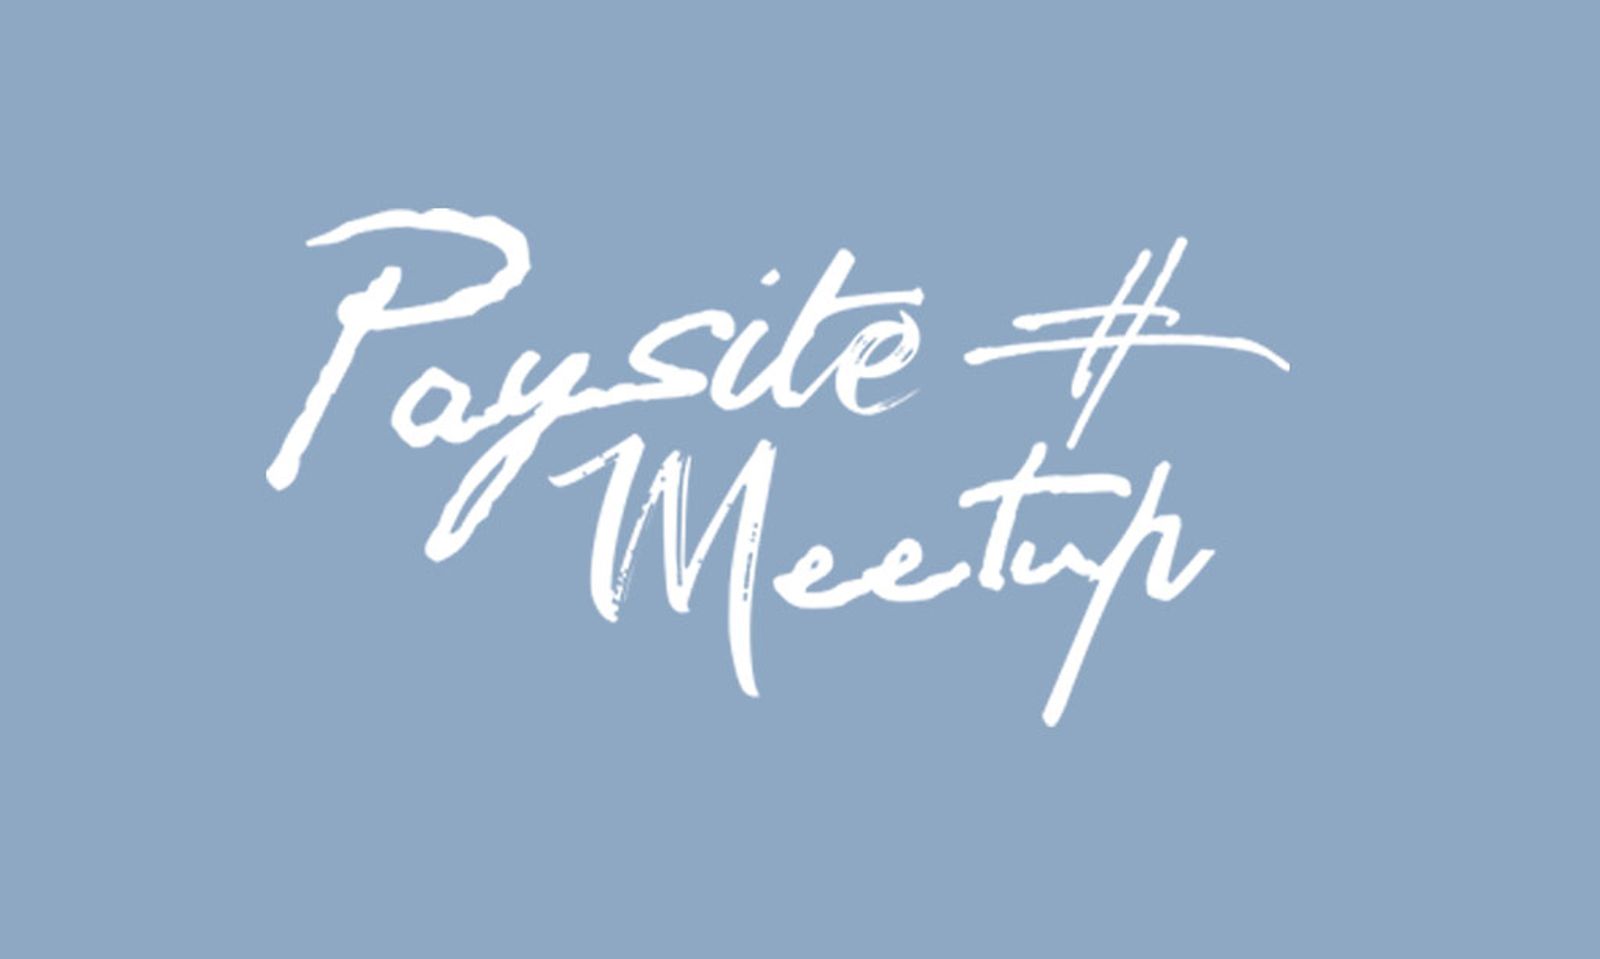 Paysite Meetup Set for First Event May 4 in Prague